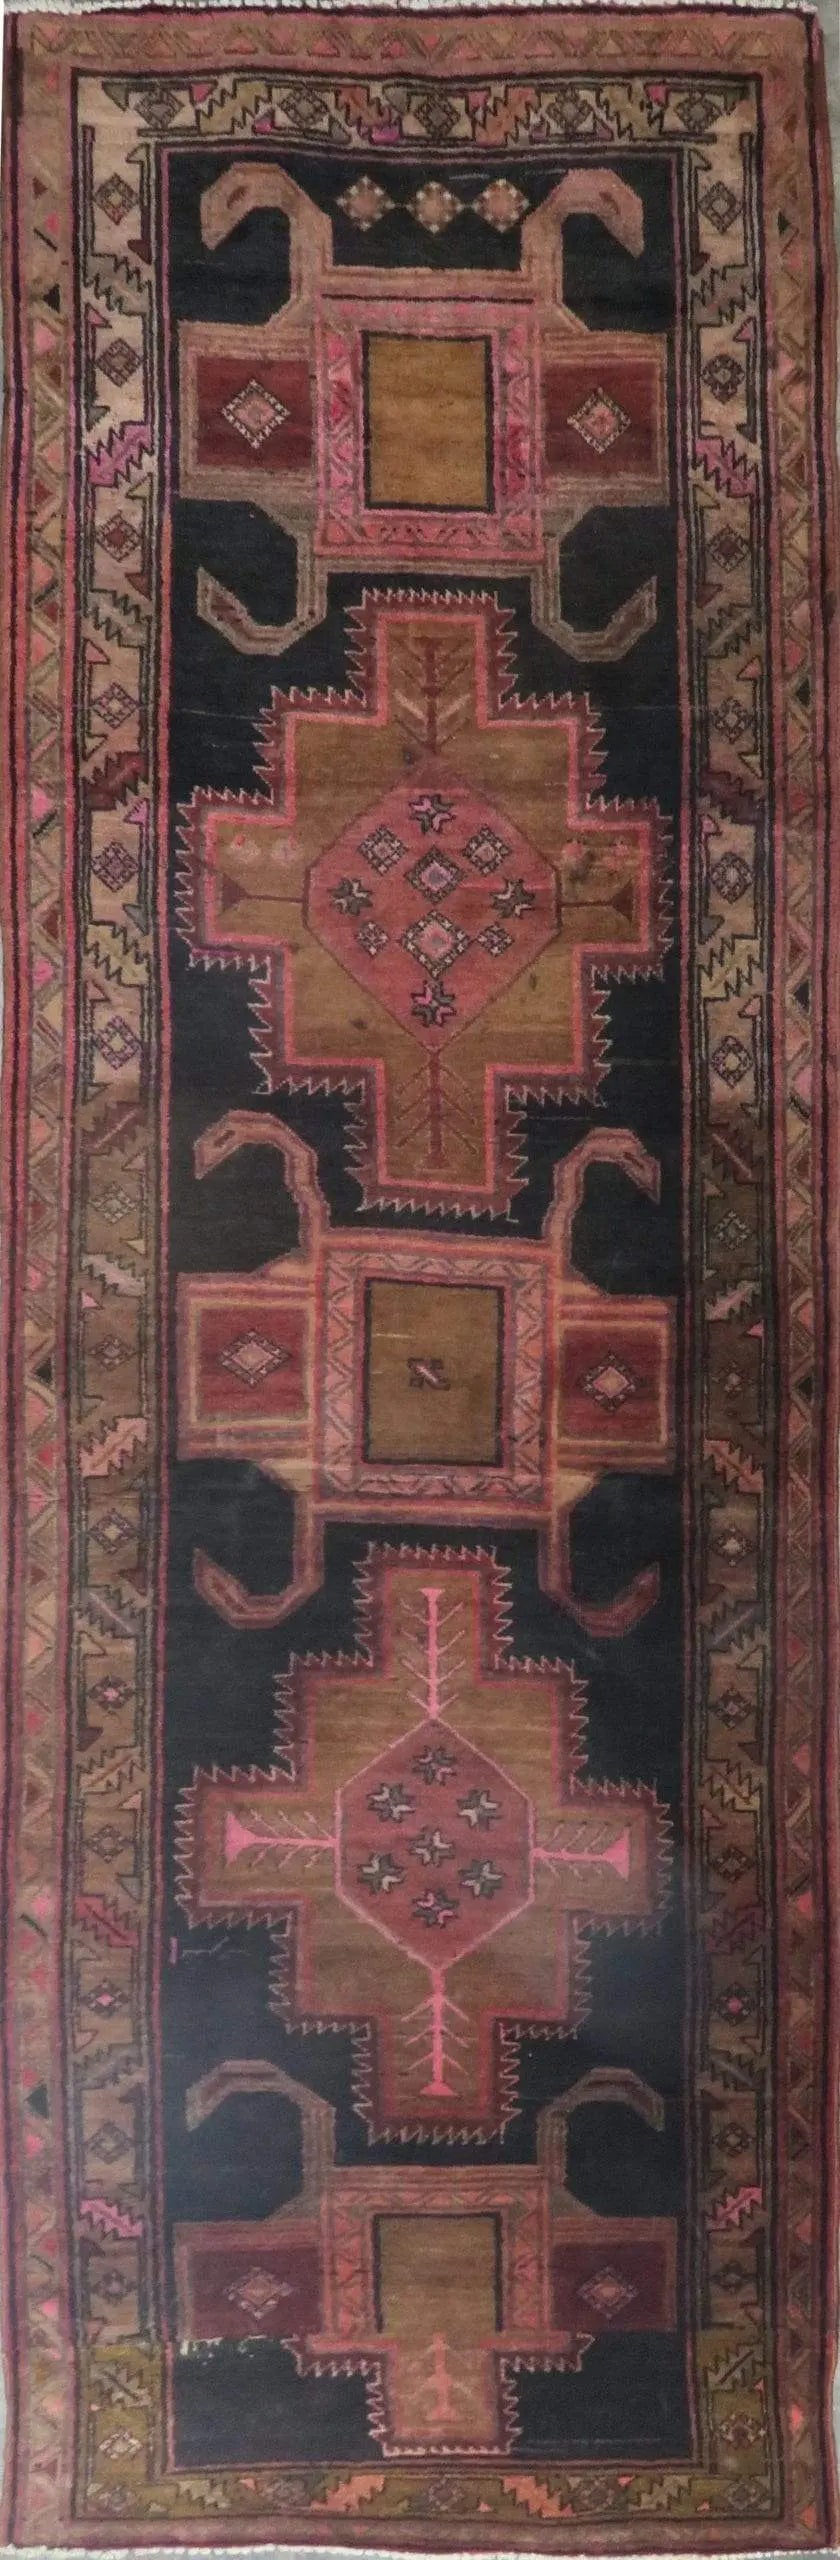 Hand-Knotted Persian Wool Rug _ Luxurious Vintage Design, 12'1" x 3'7", Artisan Crafted